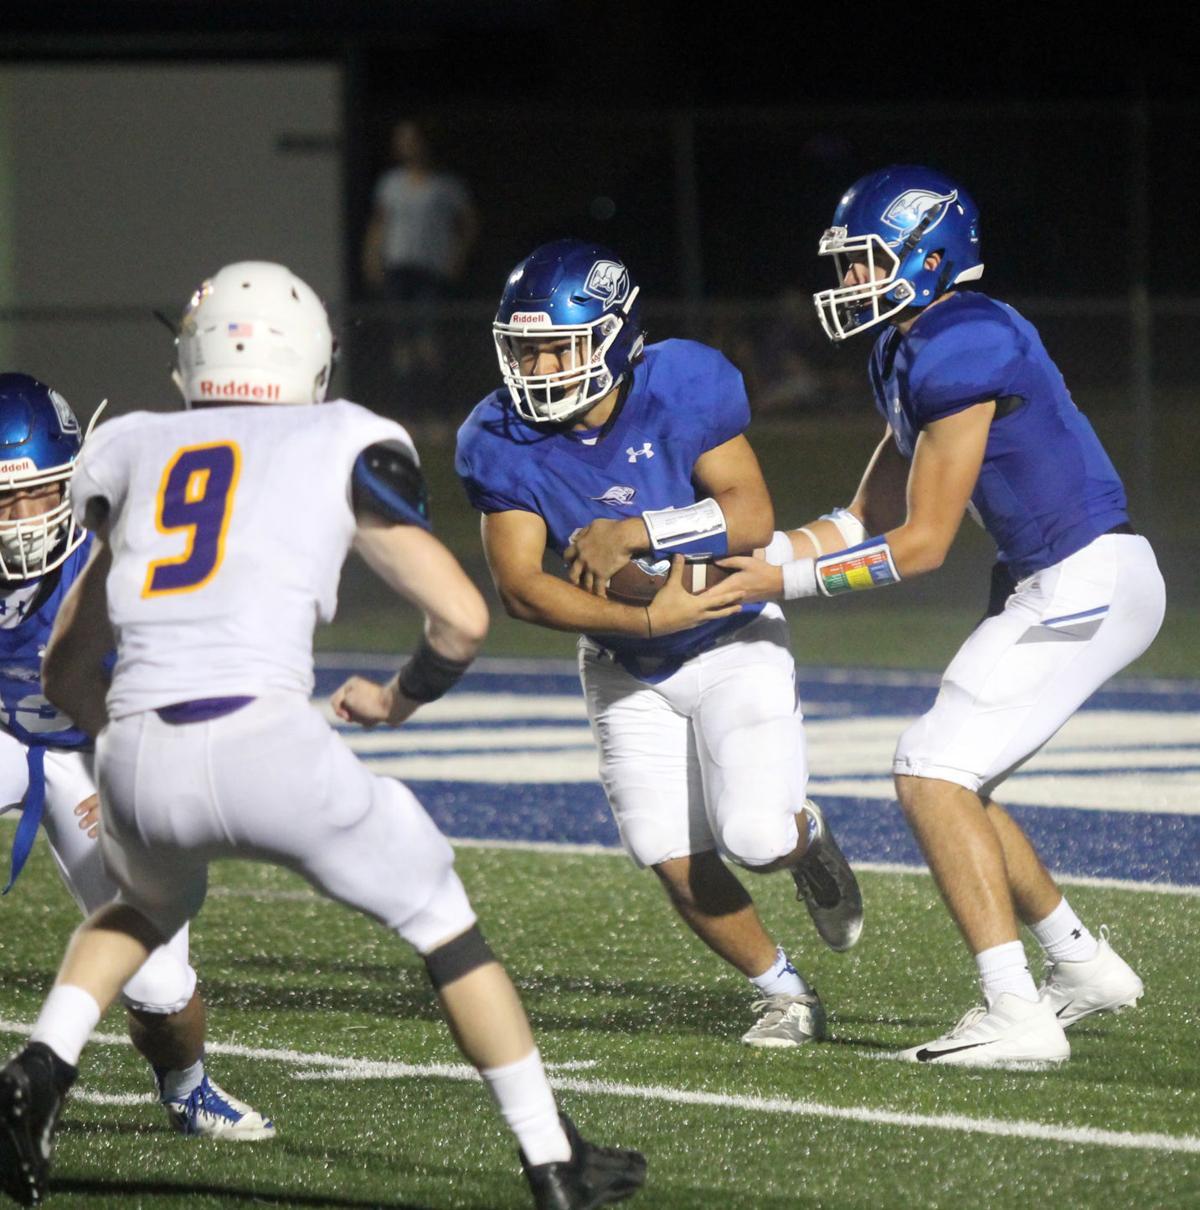 Weatherford High School Football Logo - Weatherford opens season with 23-20 victory over Granbury | Sports ...